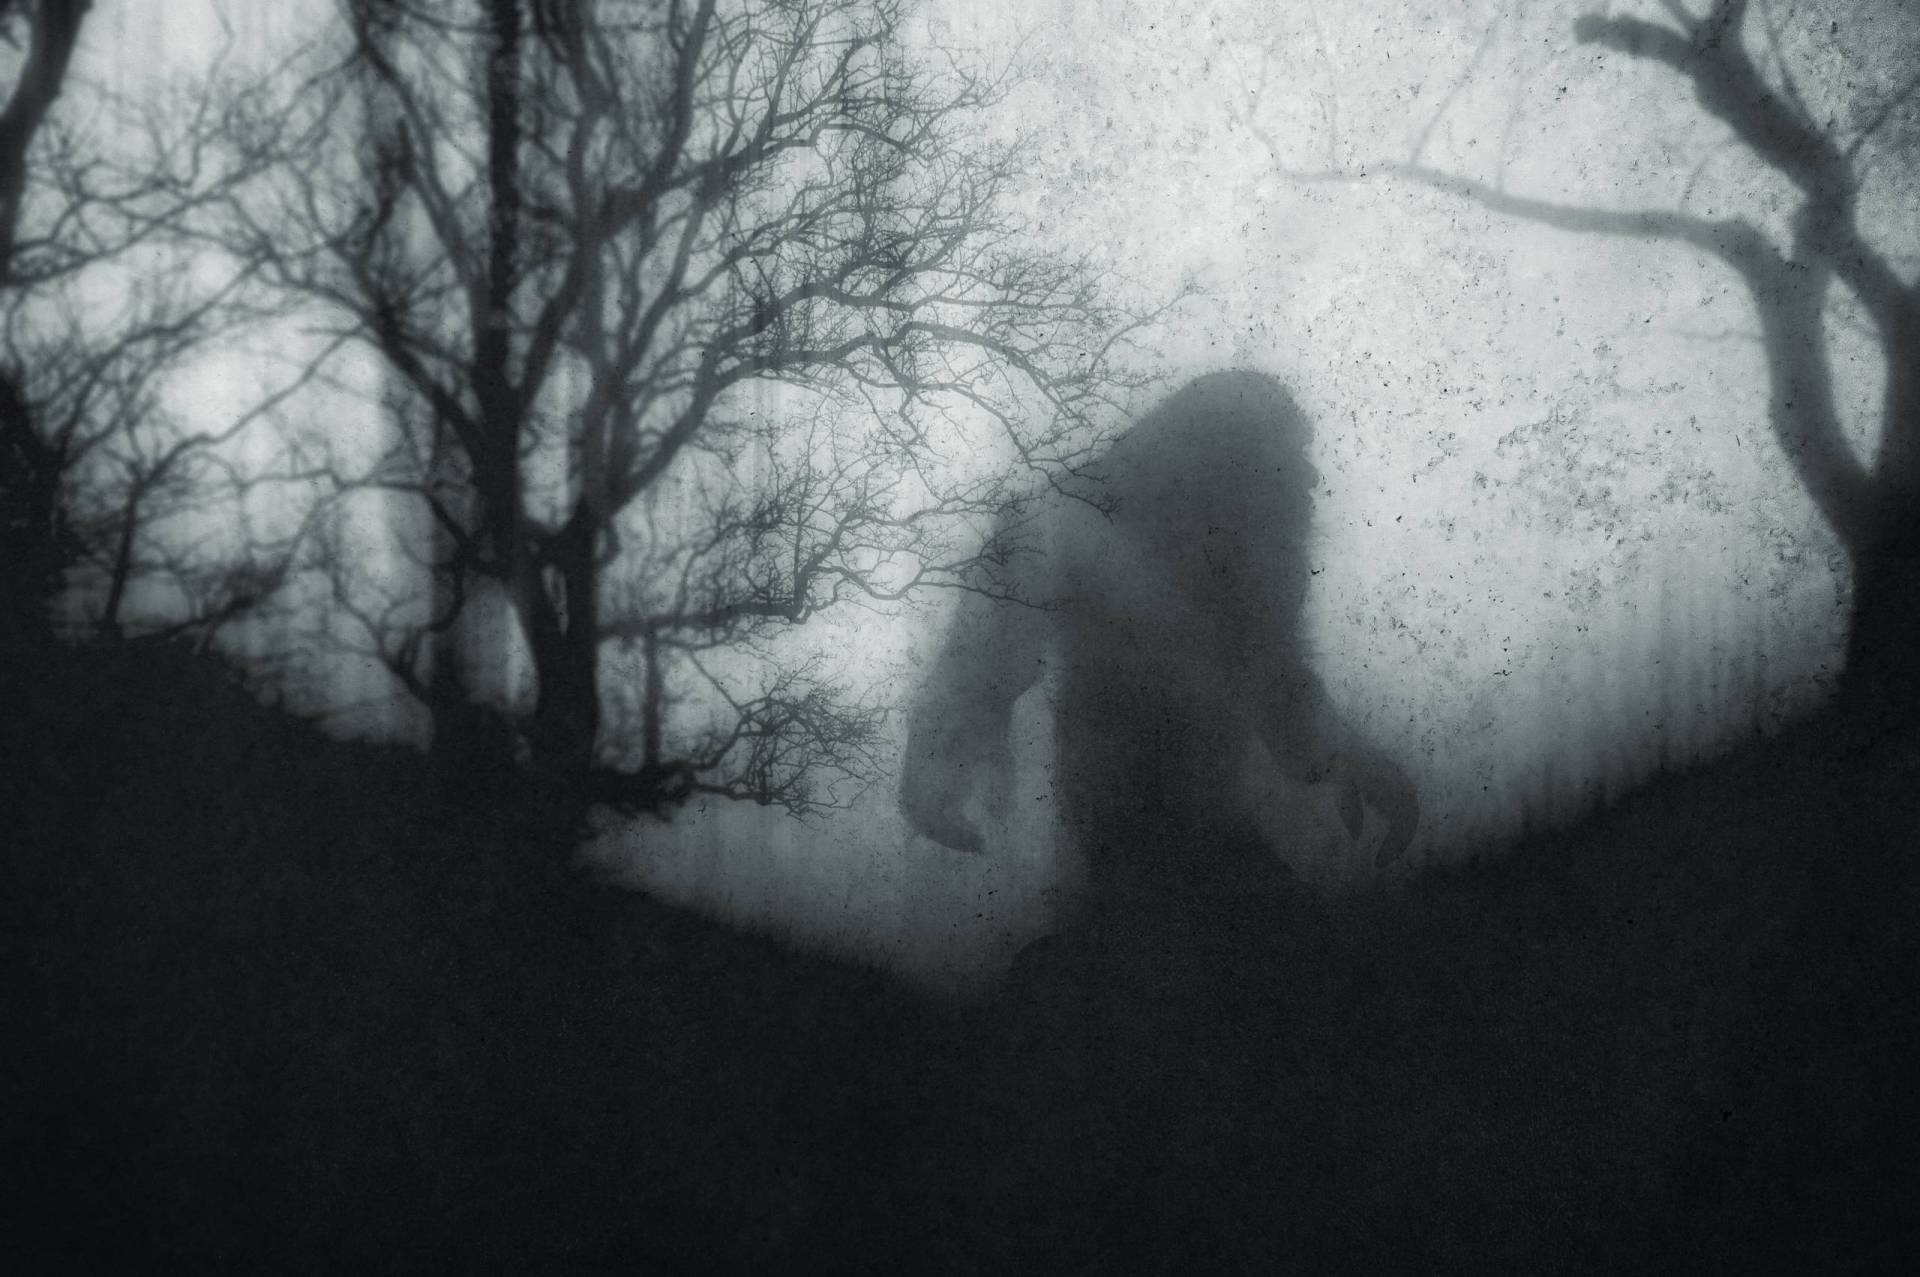 A mysterious bigfoot figure, walking through a foggy forest and silhouetted against trees.